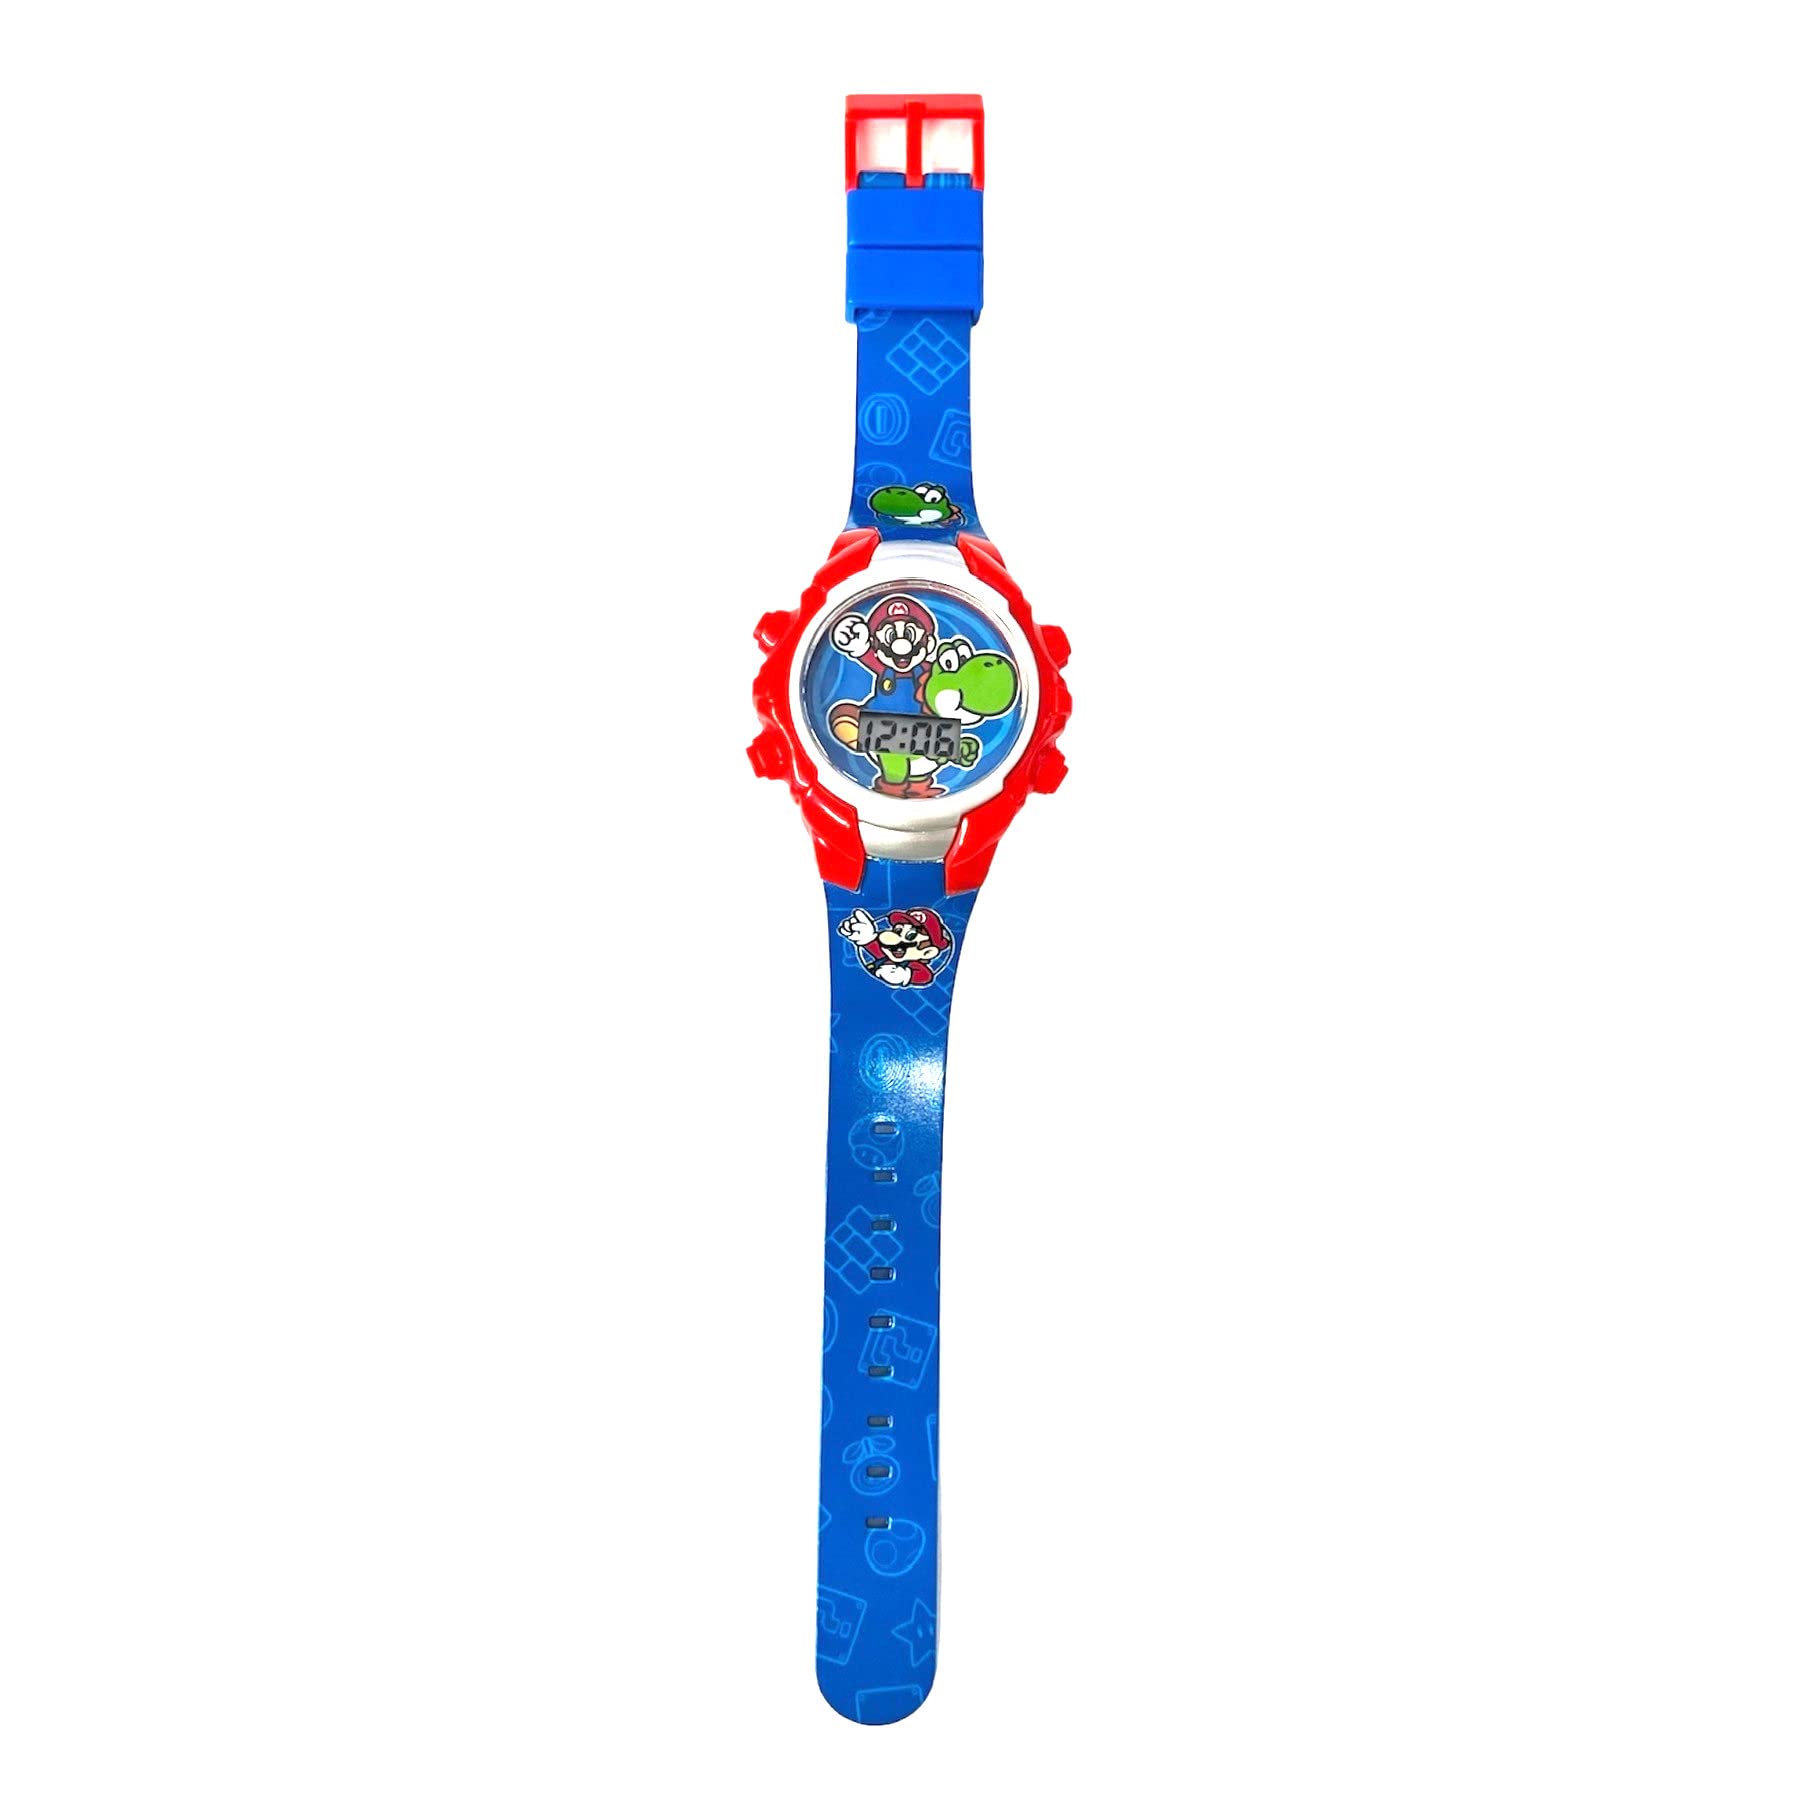 Accutime Kids Nintendo Super Mario Digital Flashing LCD Quartz Childrens Wrist Watch for Boys, Girls, Toddlers with Red and Blue Multicolor Strap (Model: GSM4042AZ)